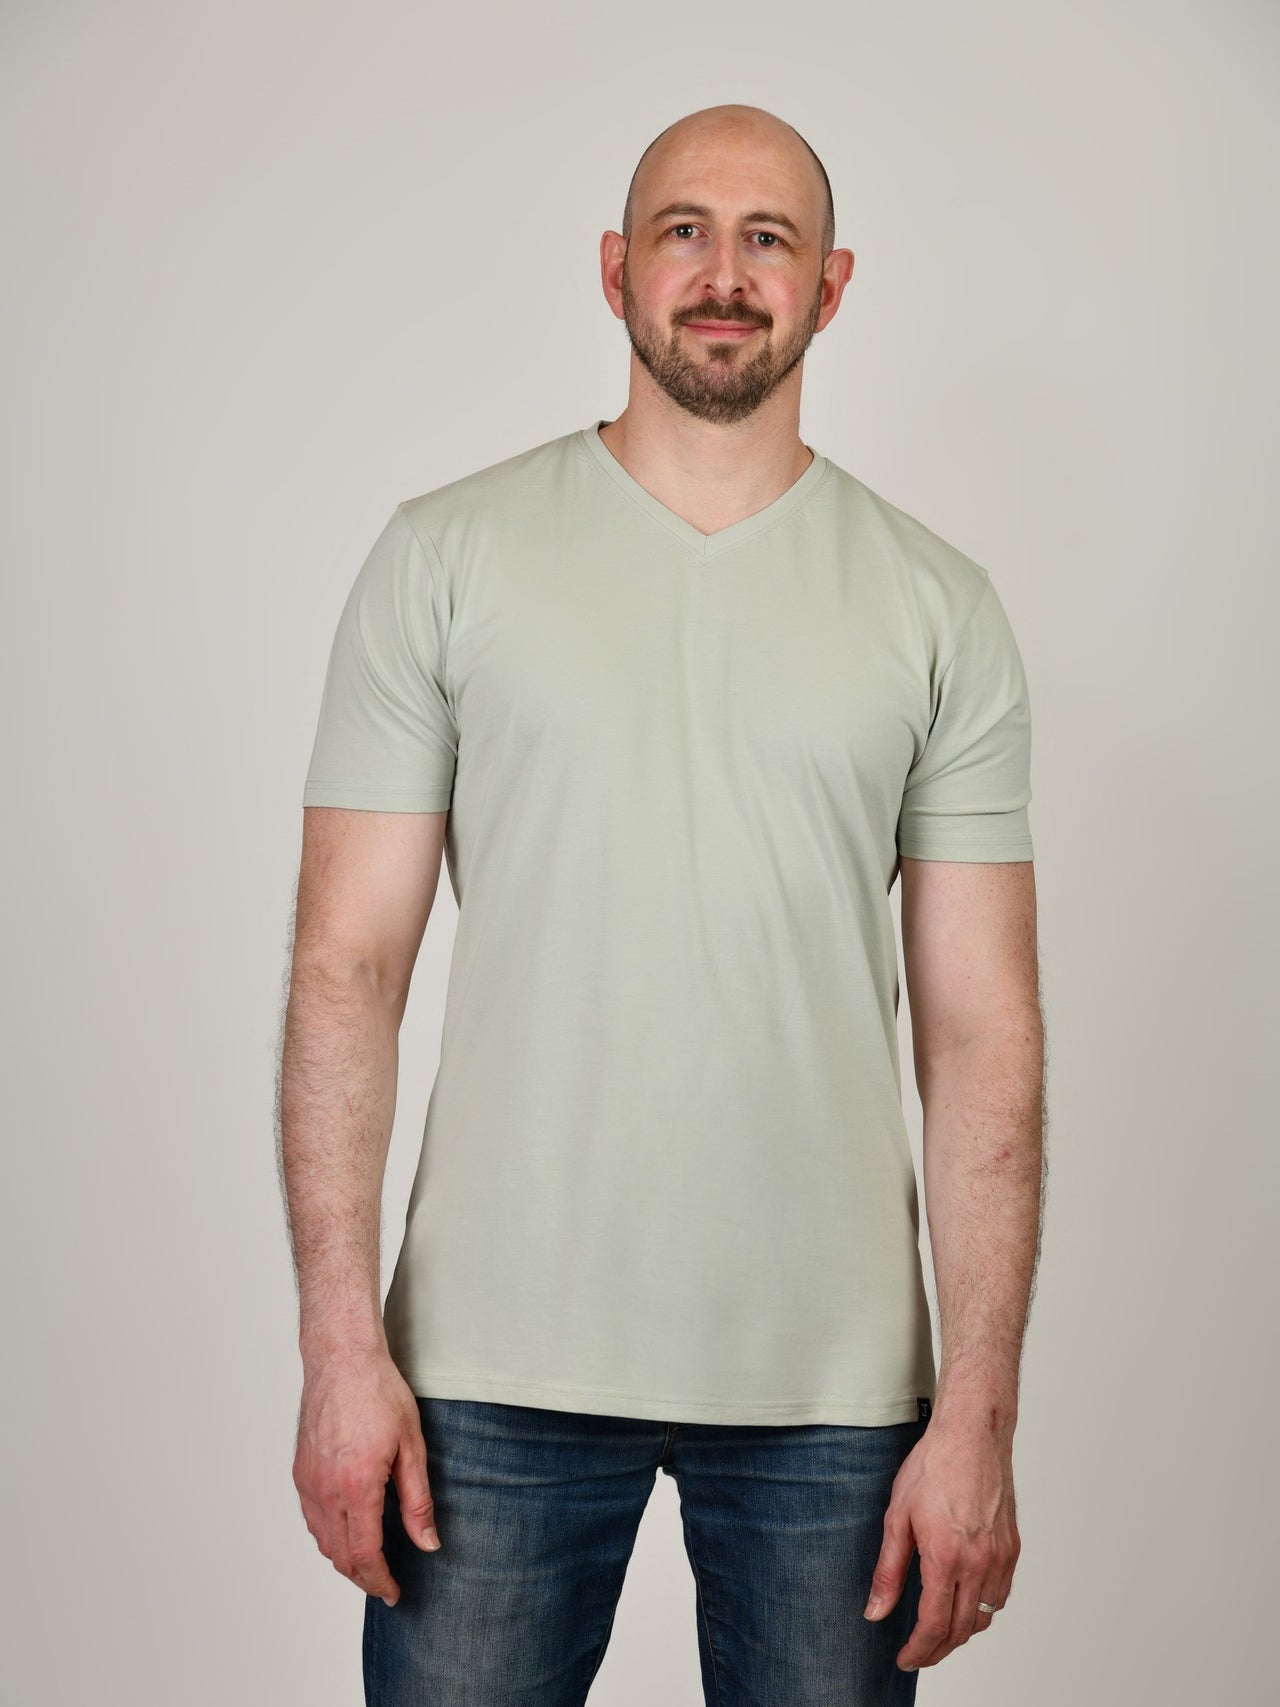 A tall and slim guy smiling in the studio and wearing a sage green XL tall slim v-neck t-shirt.